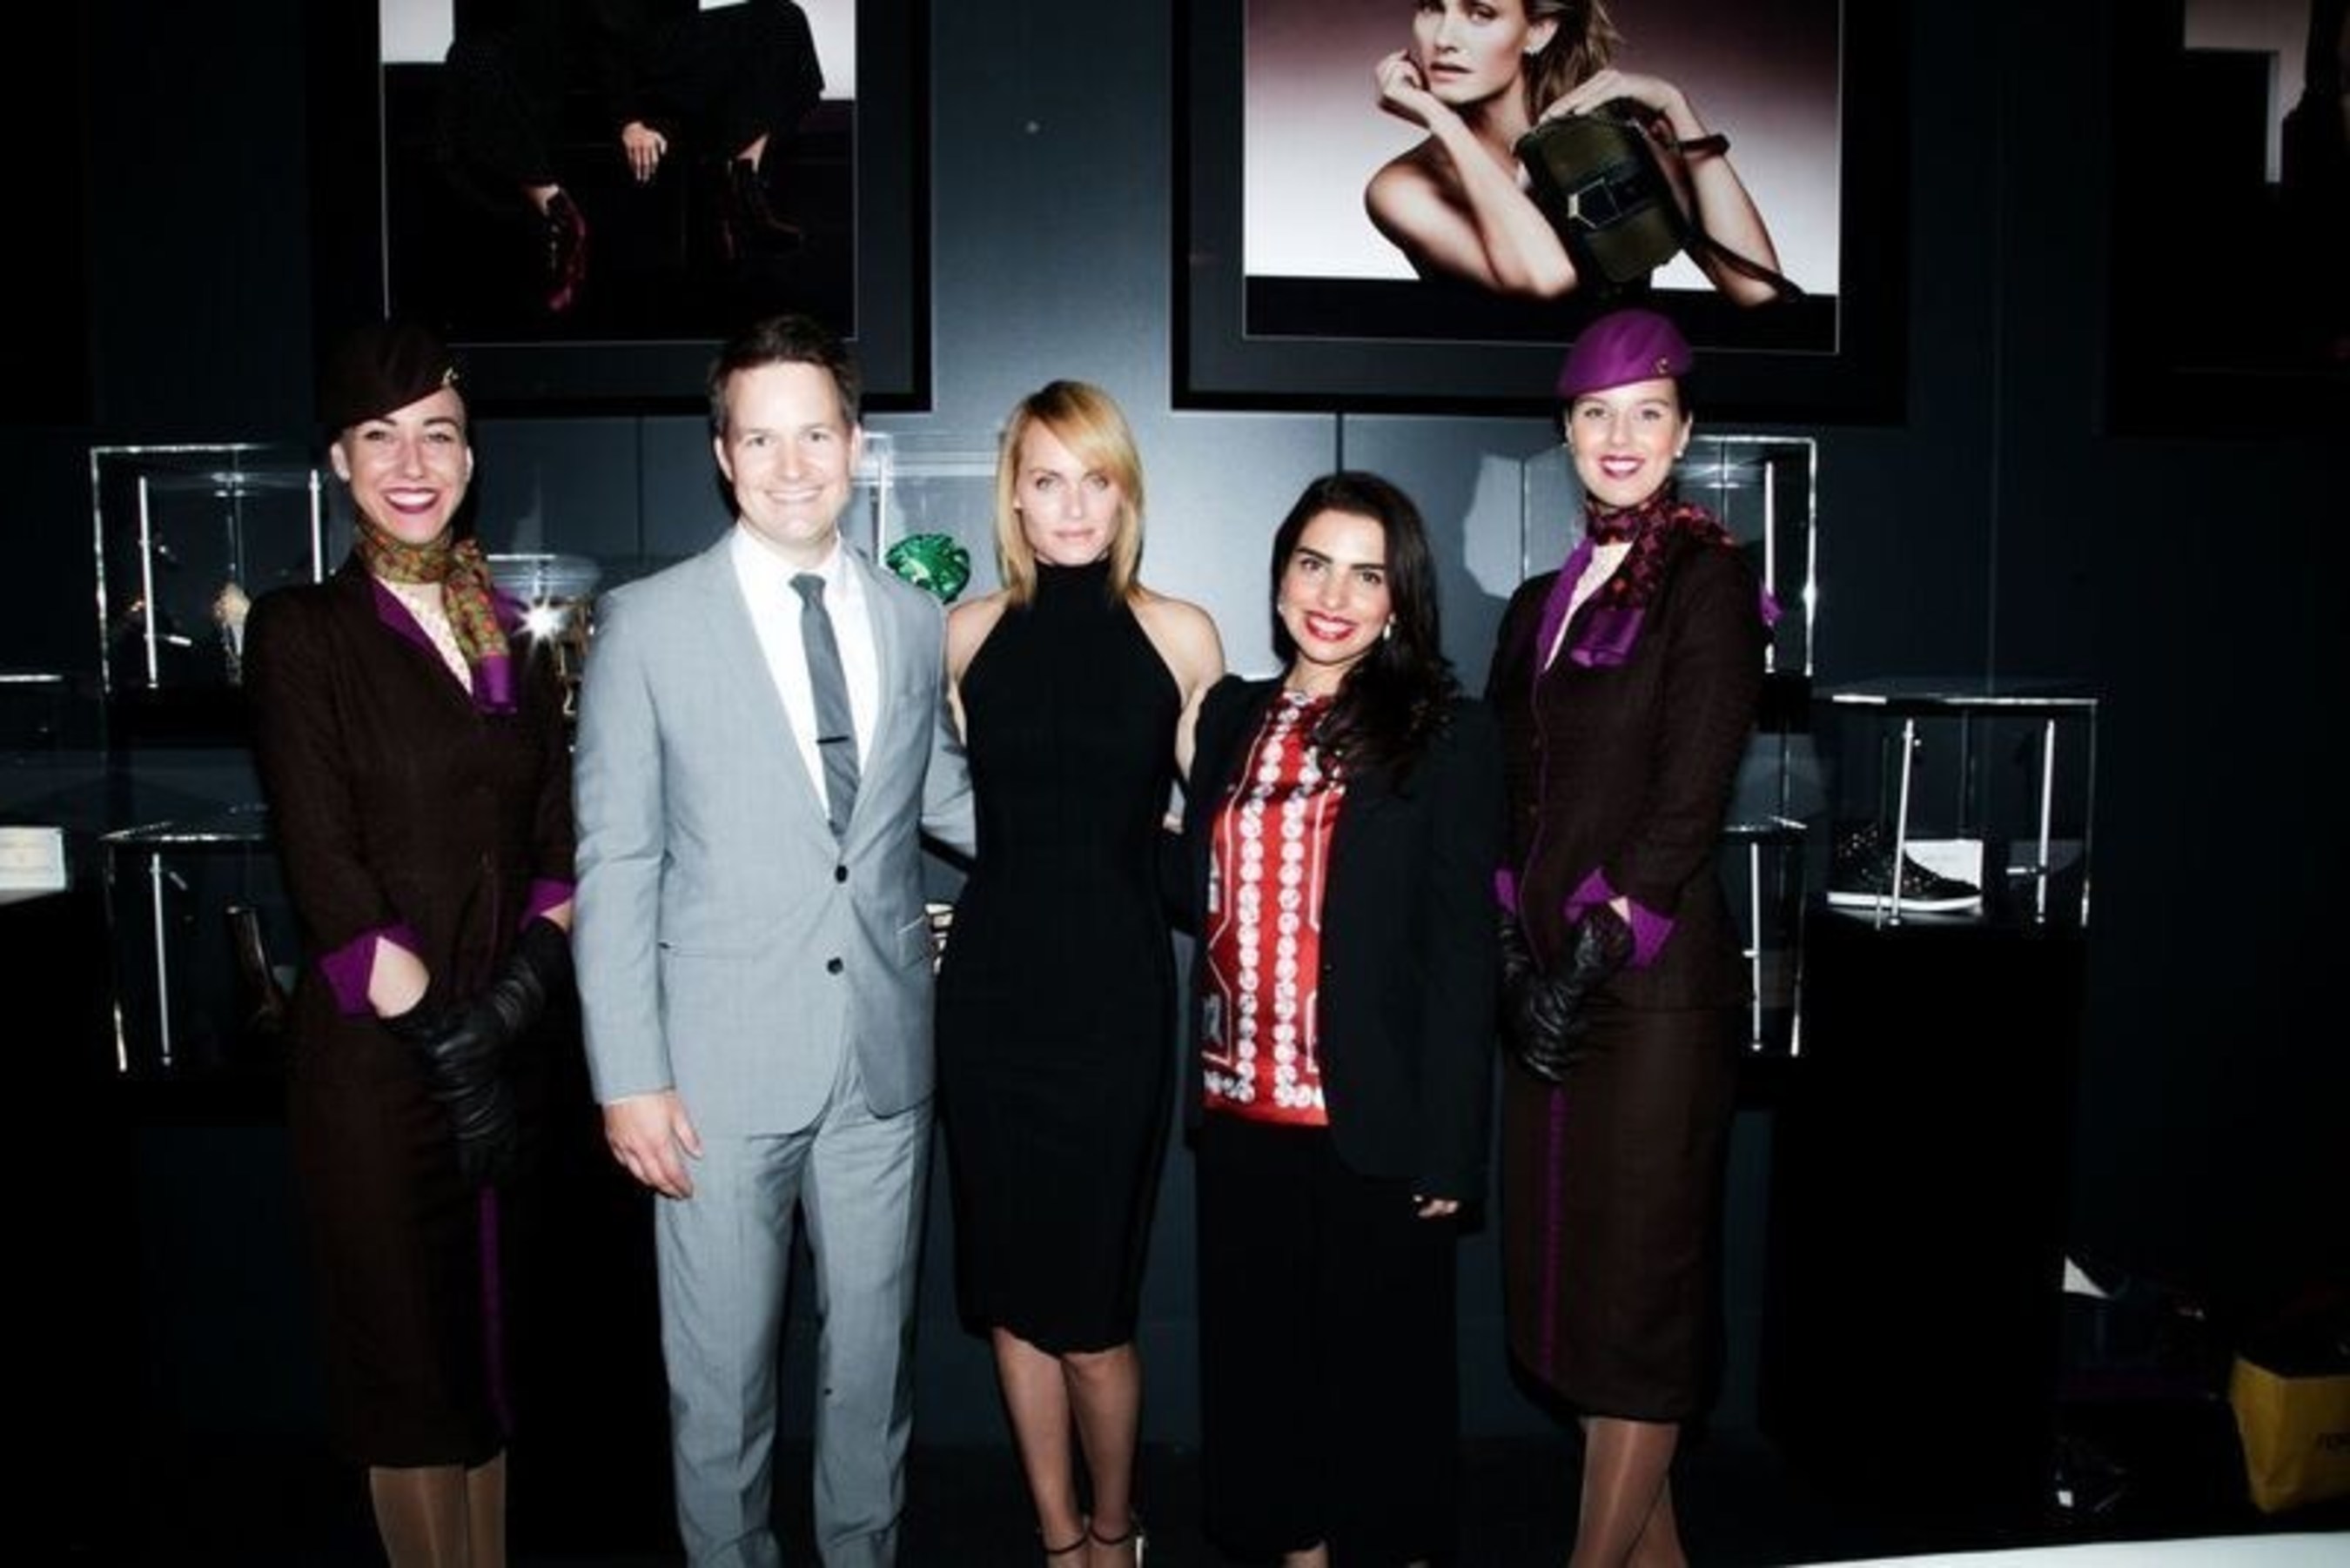 (From left to right, flanked by Etihad Airways cabin crew), Patrick Pierce, Vice President of Sponsorships - Etihad Airways; Supermodel Amber Valletta; and Amina Taher, Head of Corporate Communications - Etihad Airways celebrate the opening of the Jimmy Choo VIP Lounge hosted by Etihad and WME | IMG at Skylight at Moynihan Station.